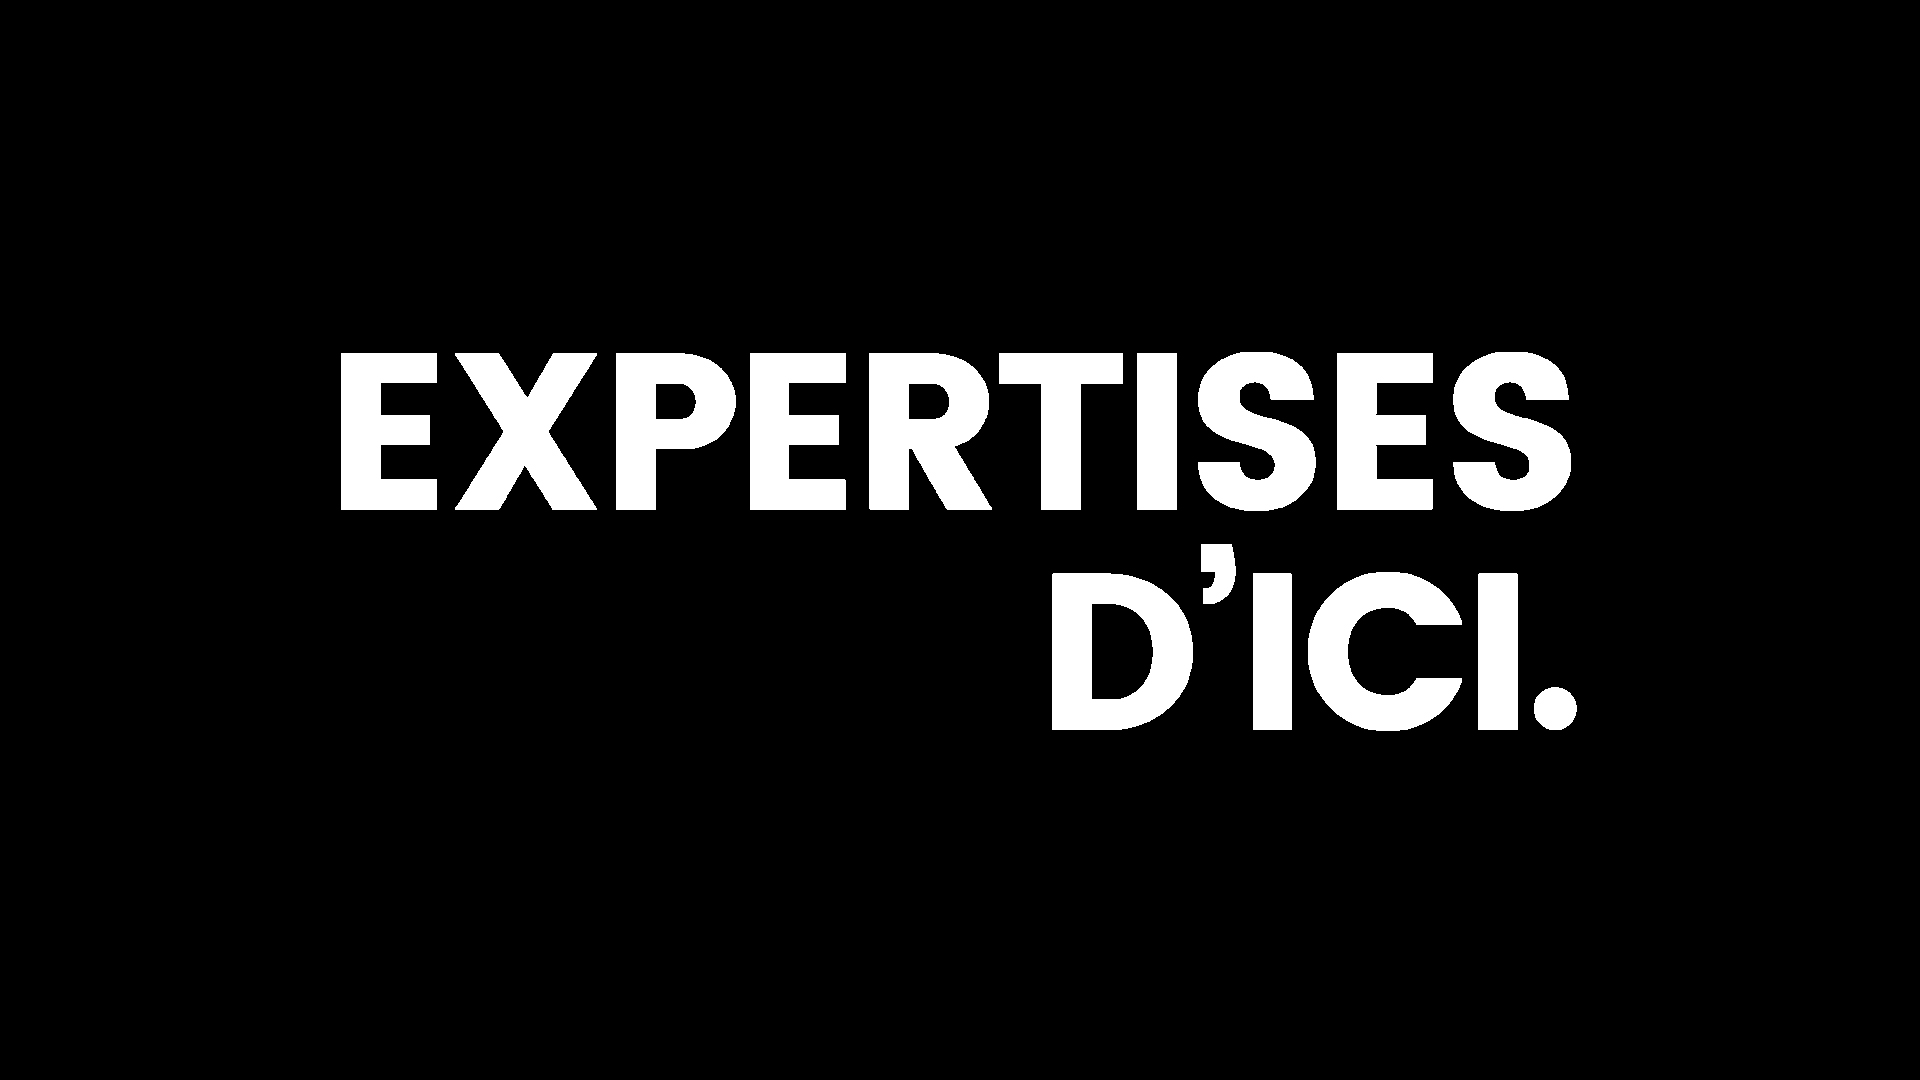 EXPERTISES D'ICI